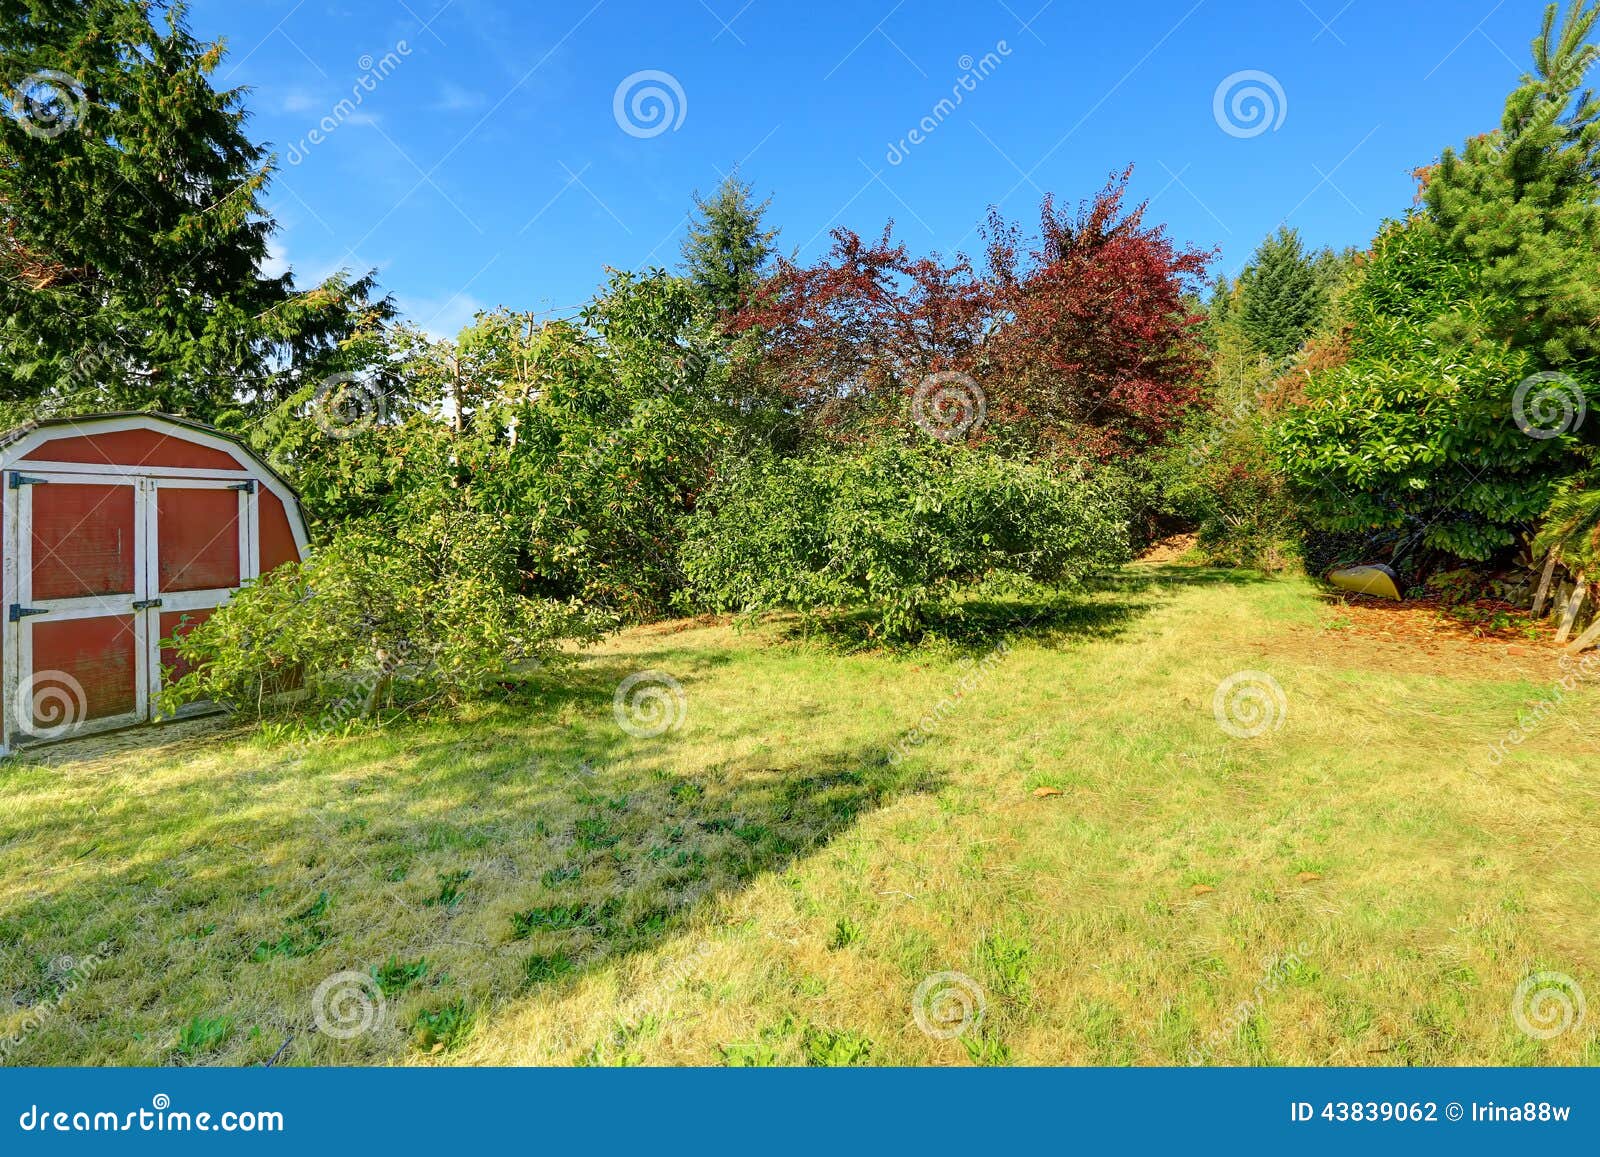 home secret old garden with small shed stock photo - image